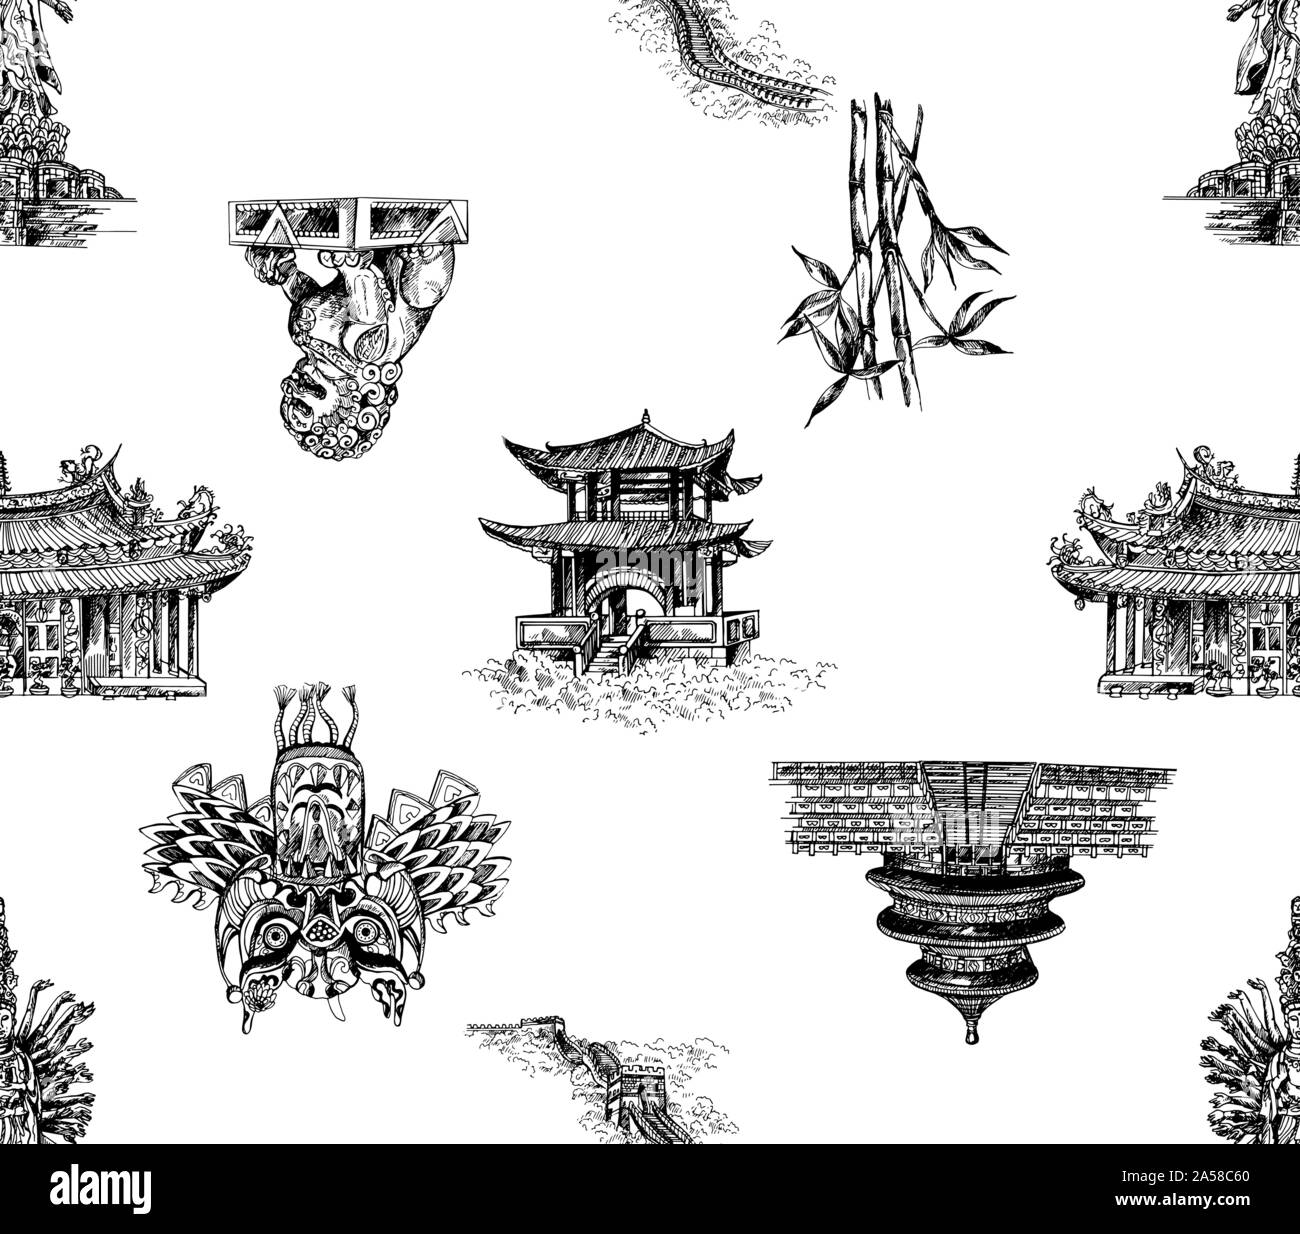 Seamless pattern of hand drawn sketch style China related objects isolated on white background. Vector illustration. Stock Vector